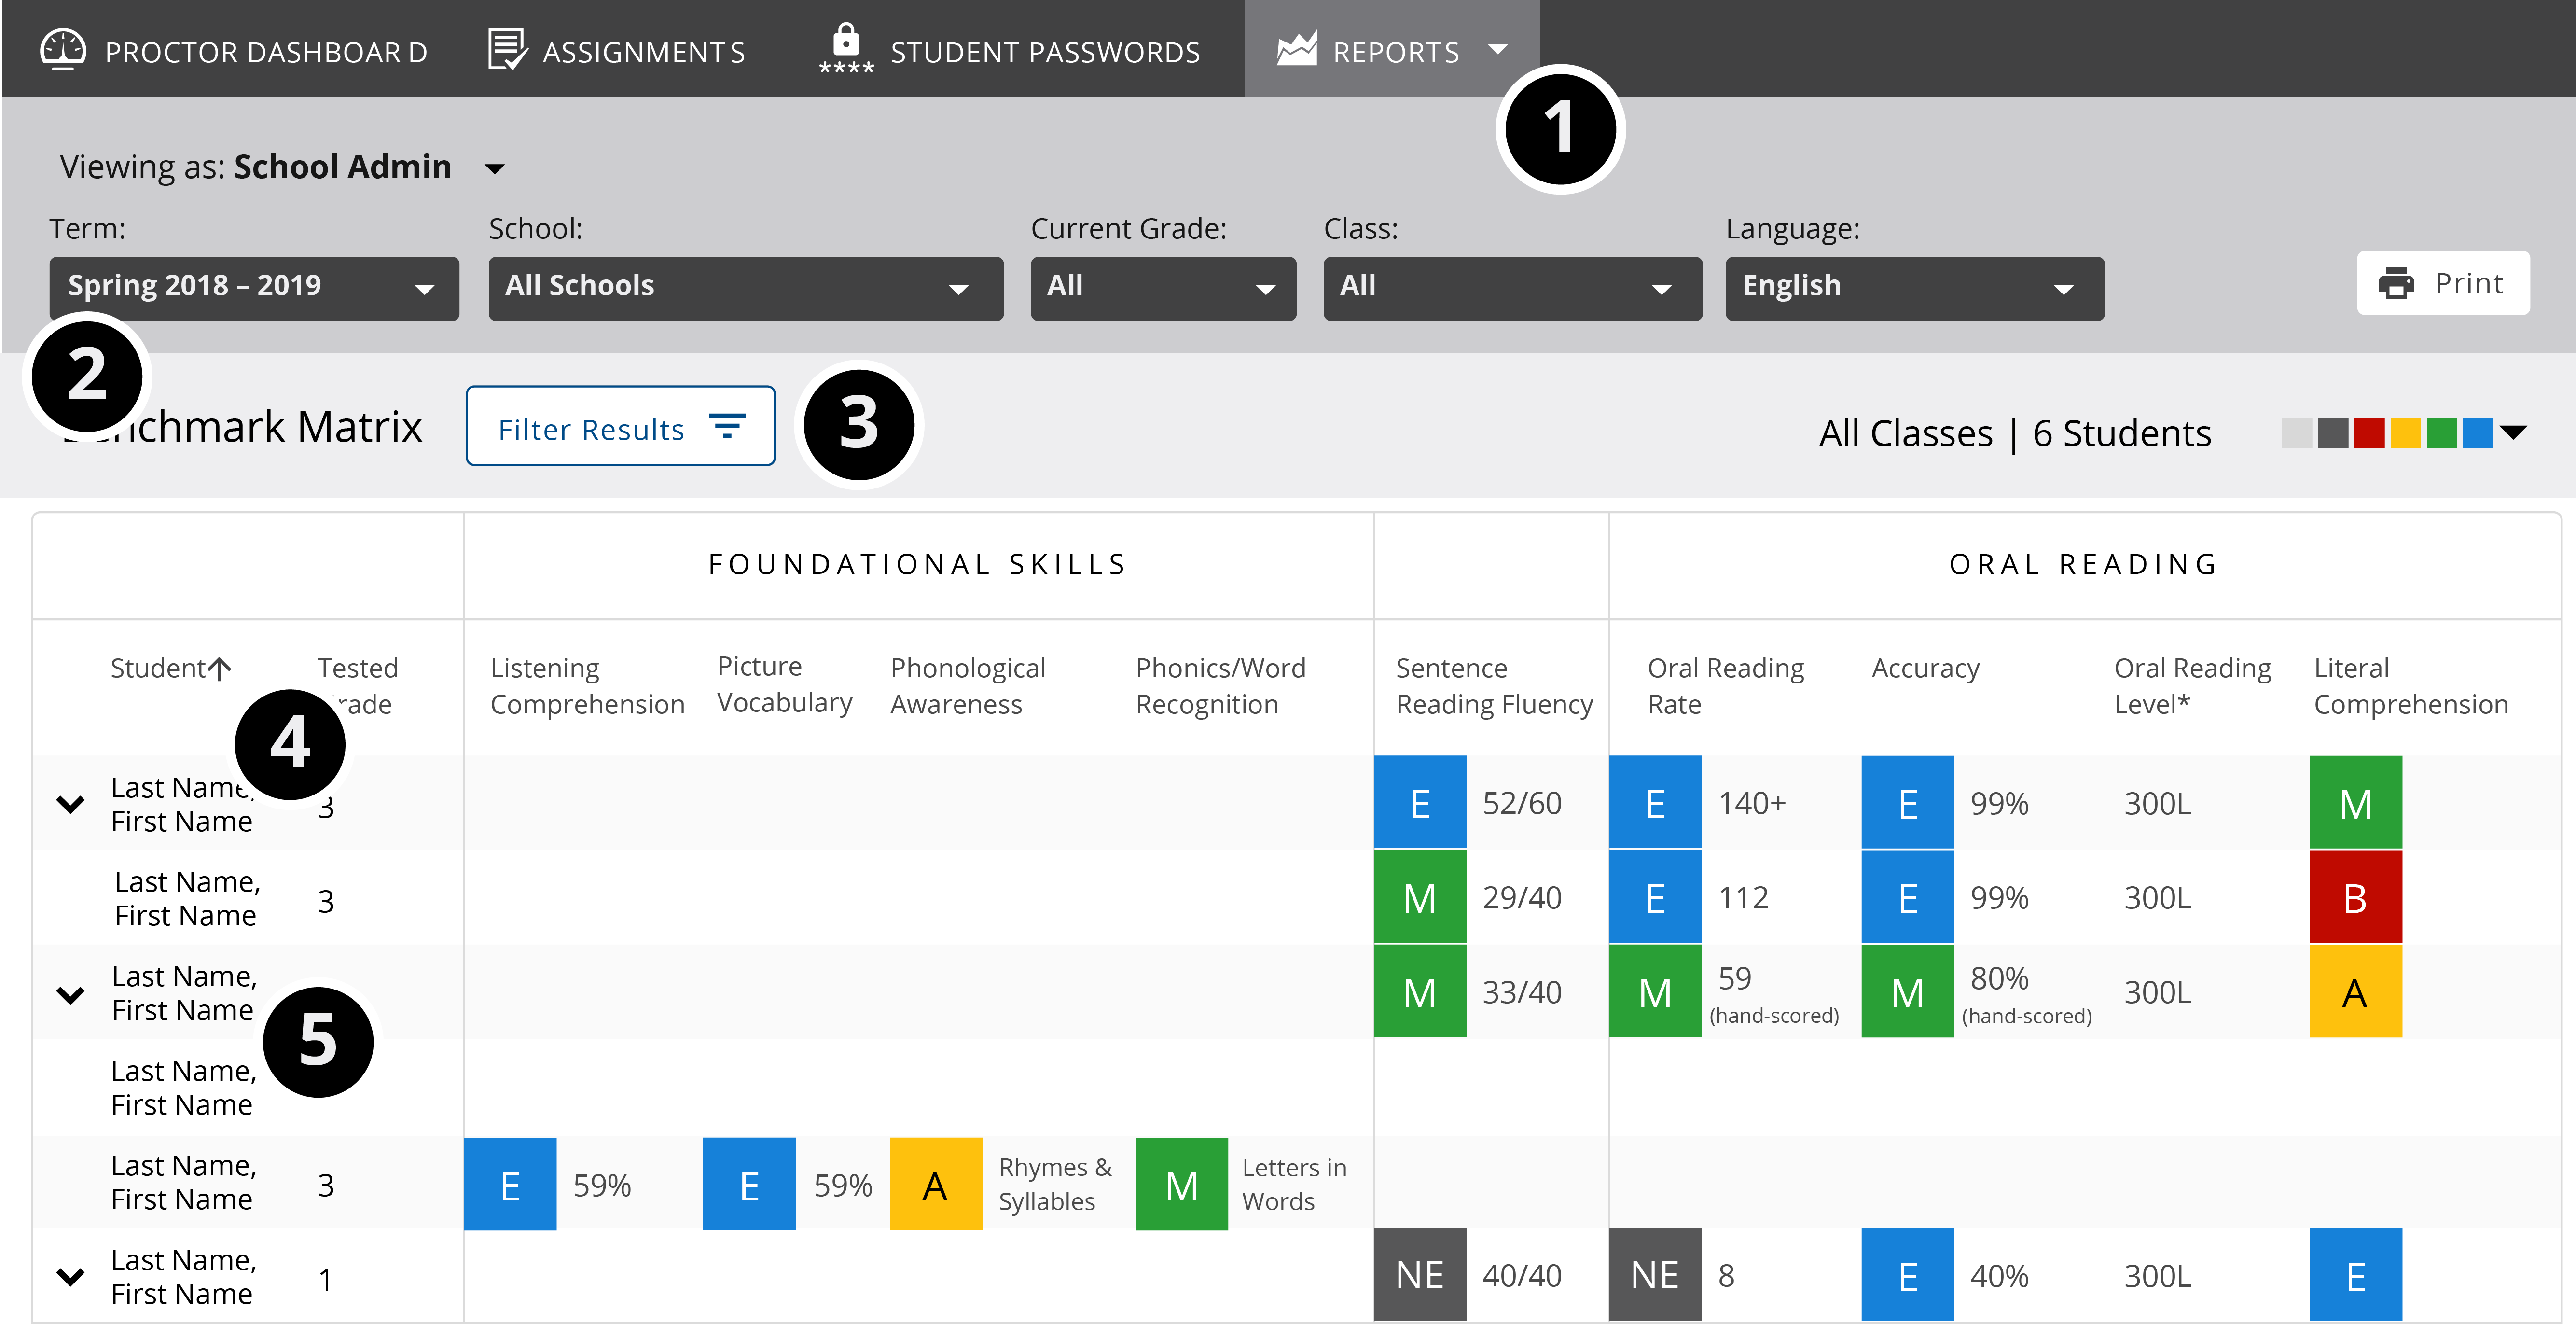 Available reports and where to select data parameters, including user role, term, school, grade, class, language, results, Universal Screener Outcome, and student names